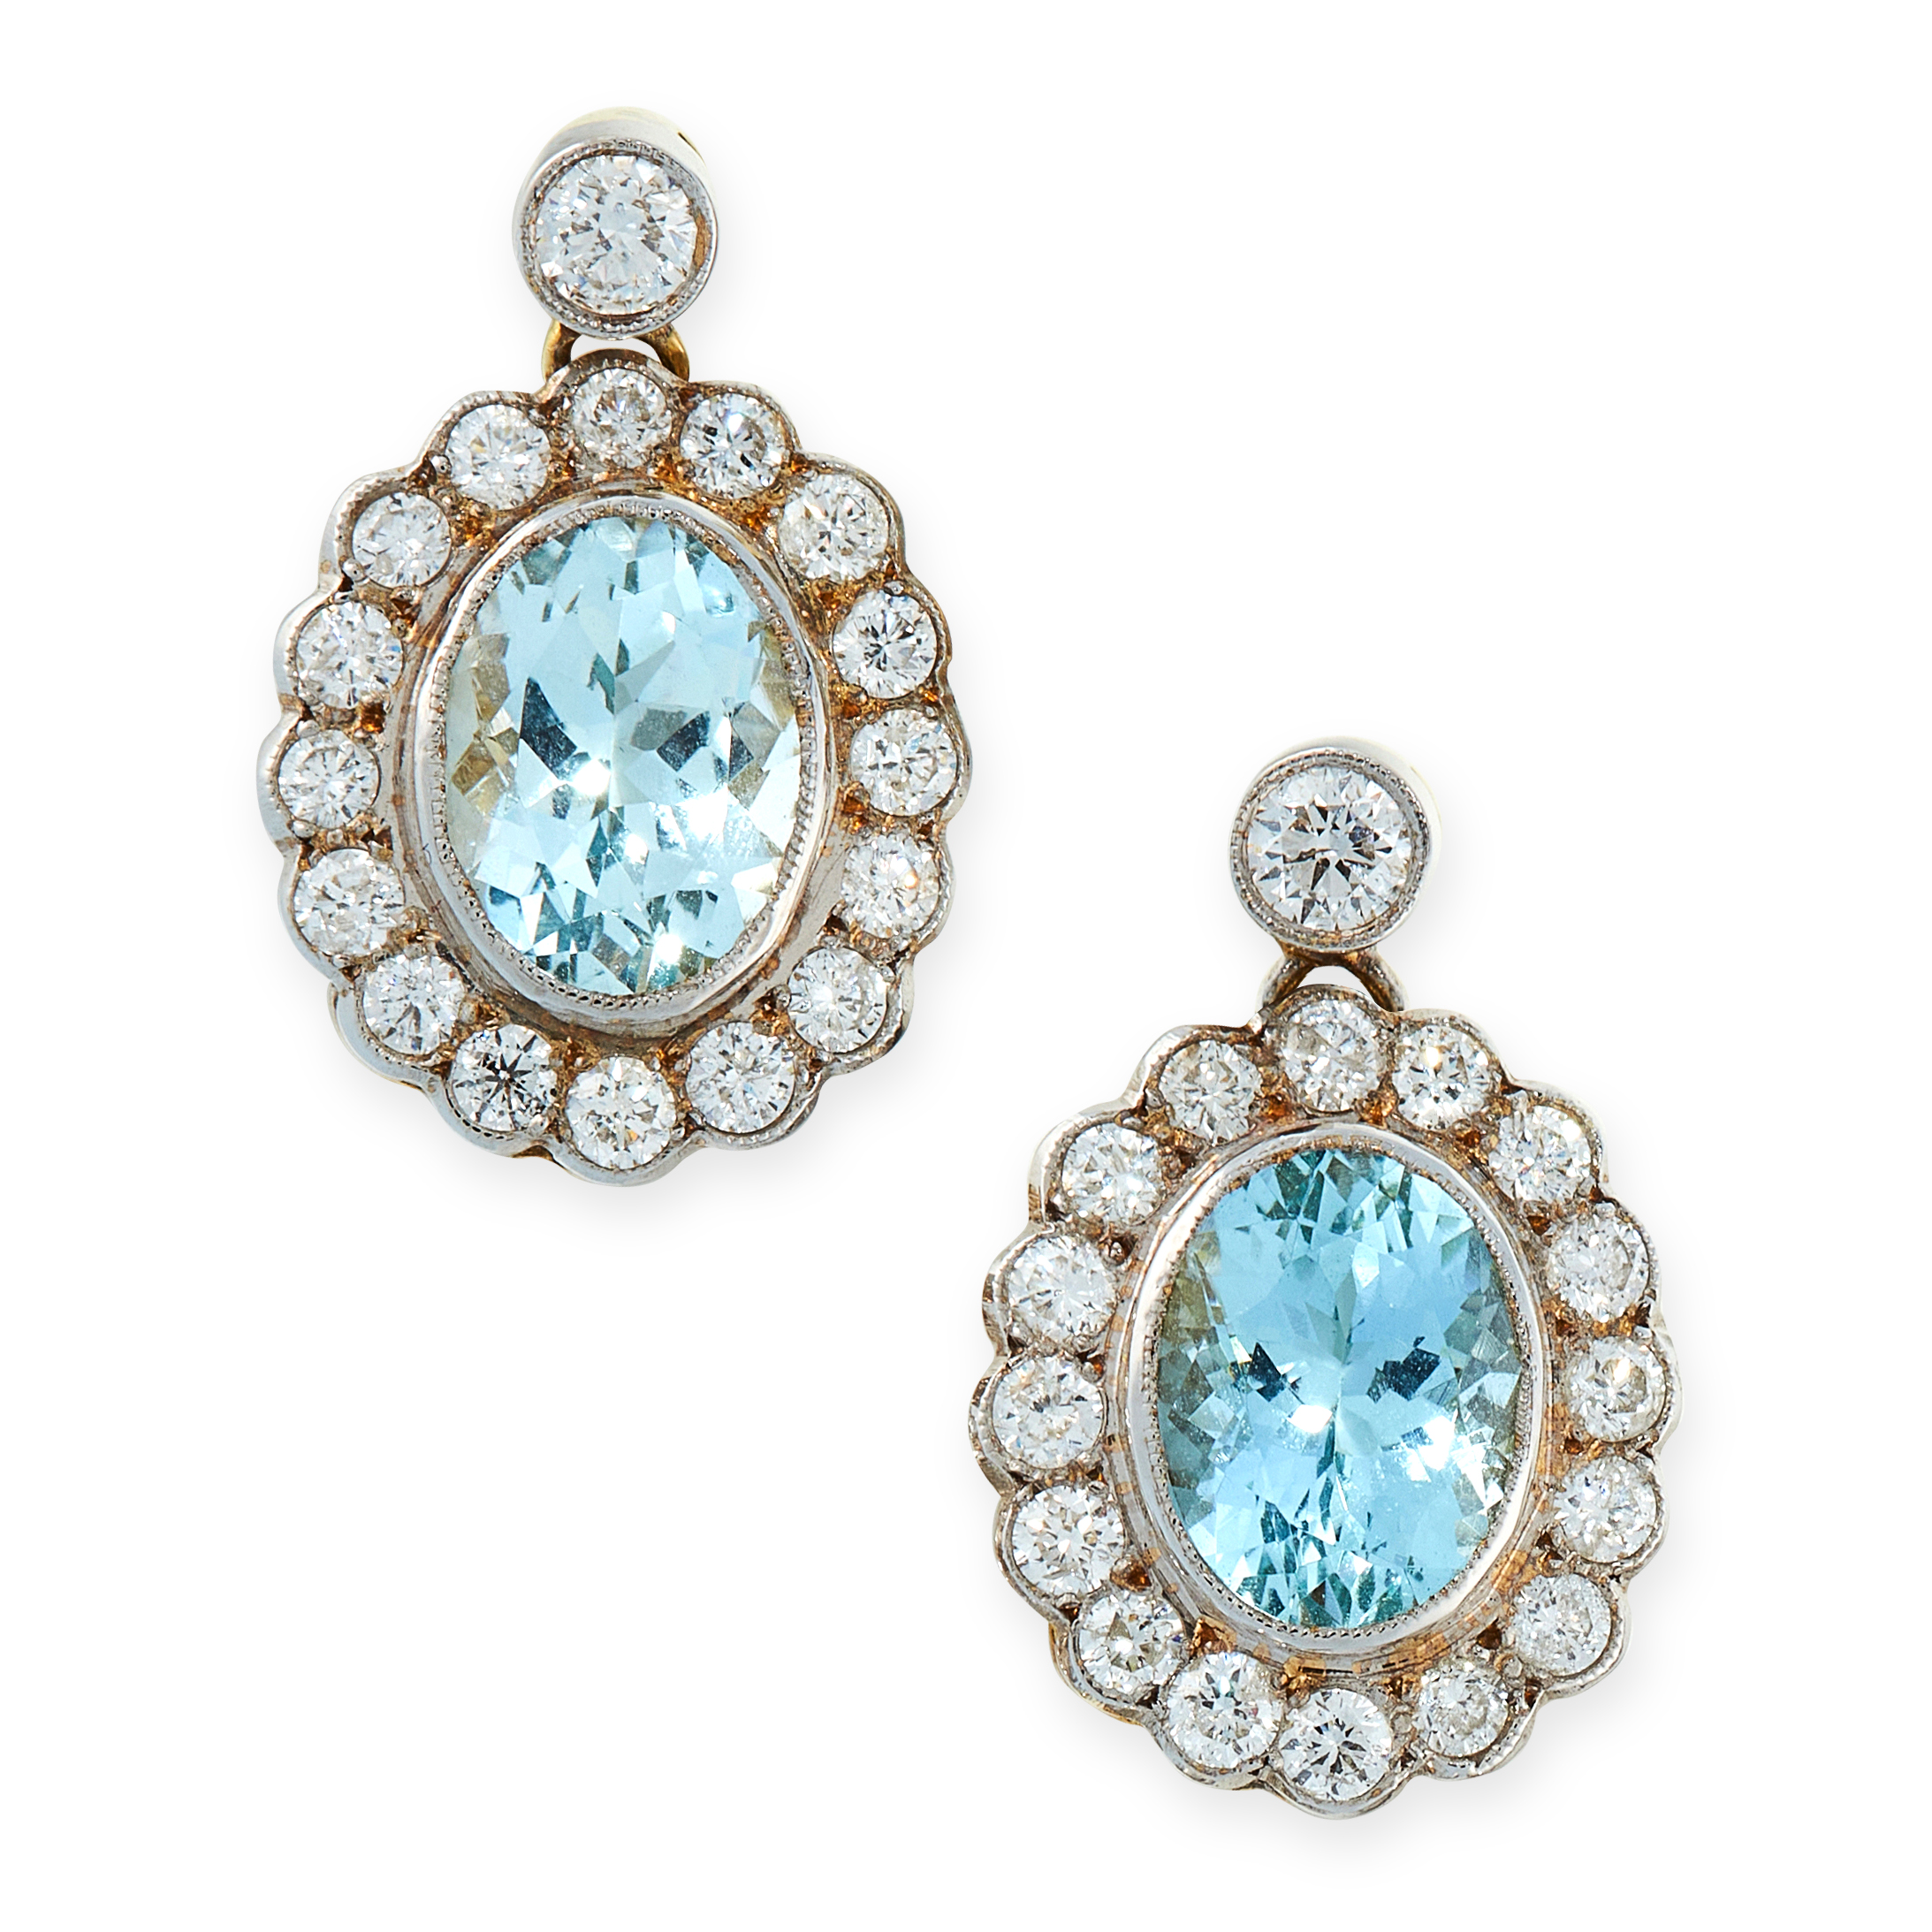 A PAIR OF AQUAMARINE AND DIAMOND EARRINGS in 18ct yellow gold, each set with an oval cut